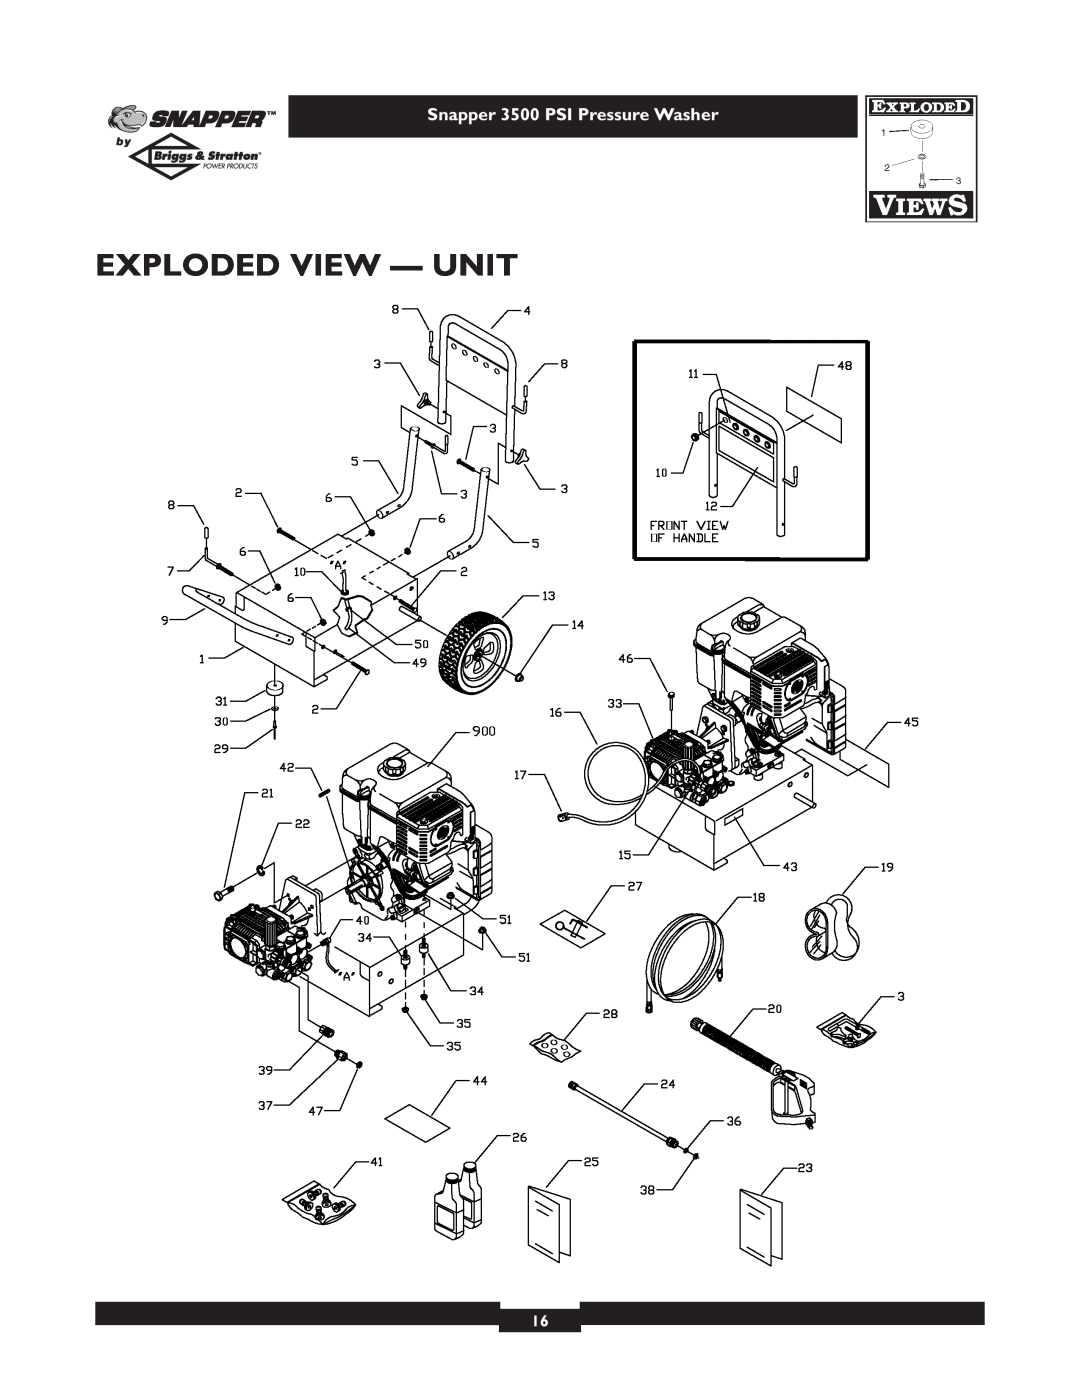 Briggs & Stratton 3500PSI manual Exploded View - Unit, Snapper 3500 PSI Pressure Washer 